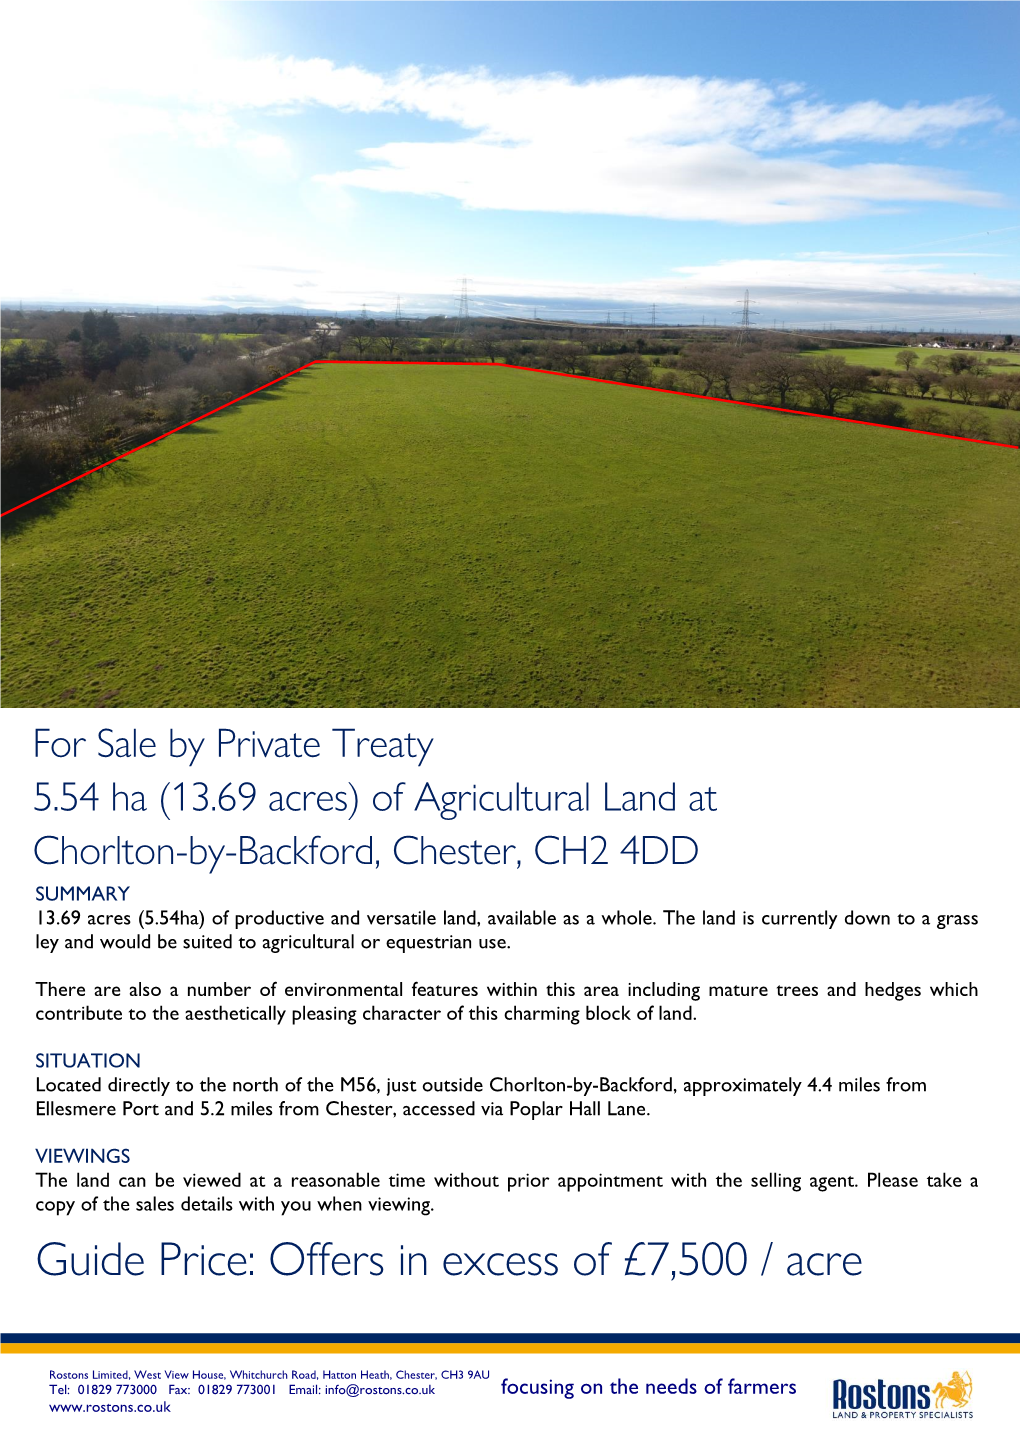 Guide Price: Offers in Excess of £7,500 / Acre